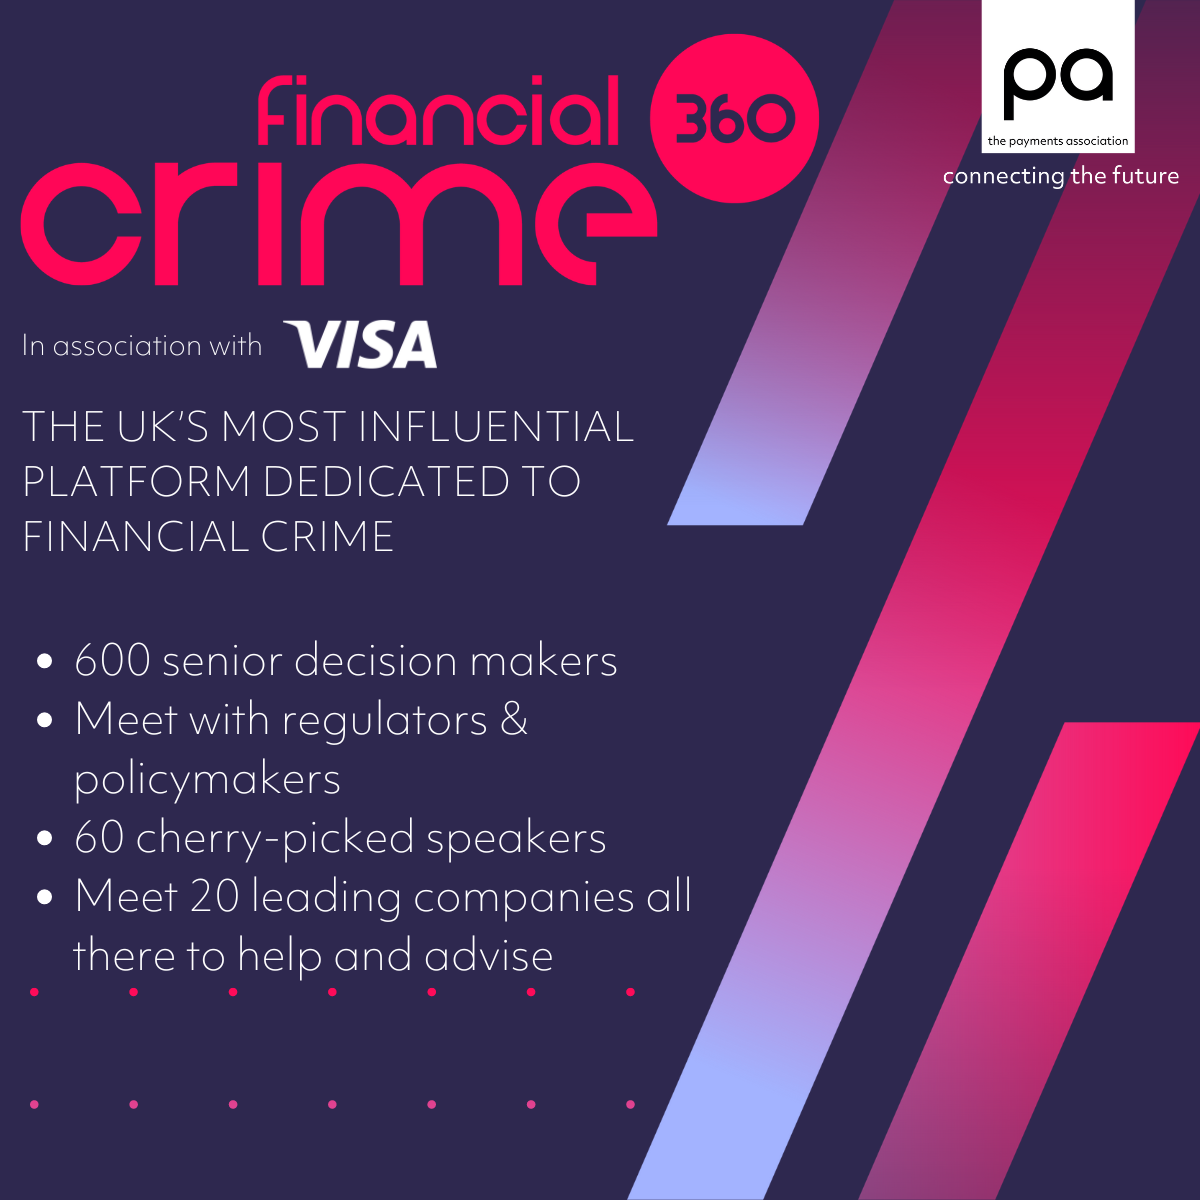 Financial Crime 360 organized by The Payments Association